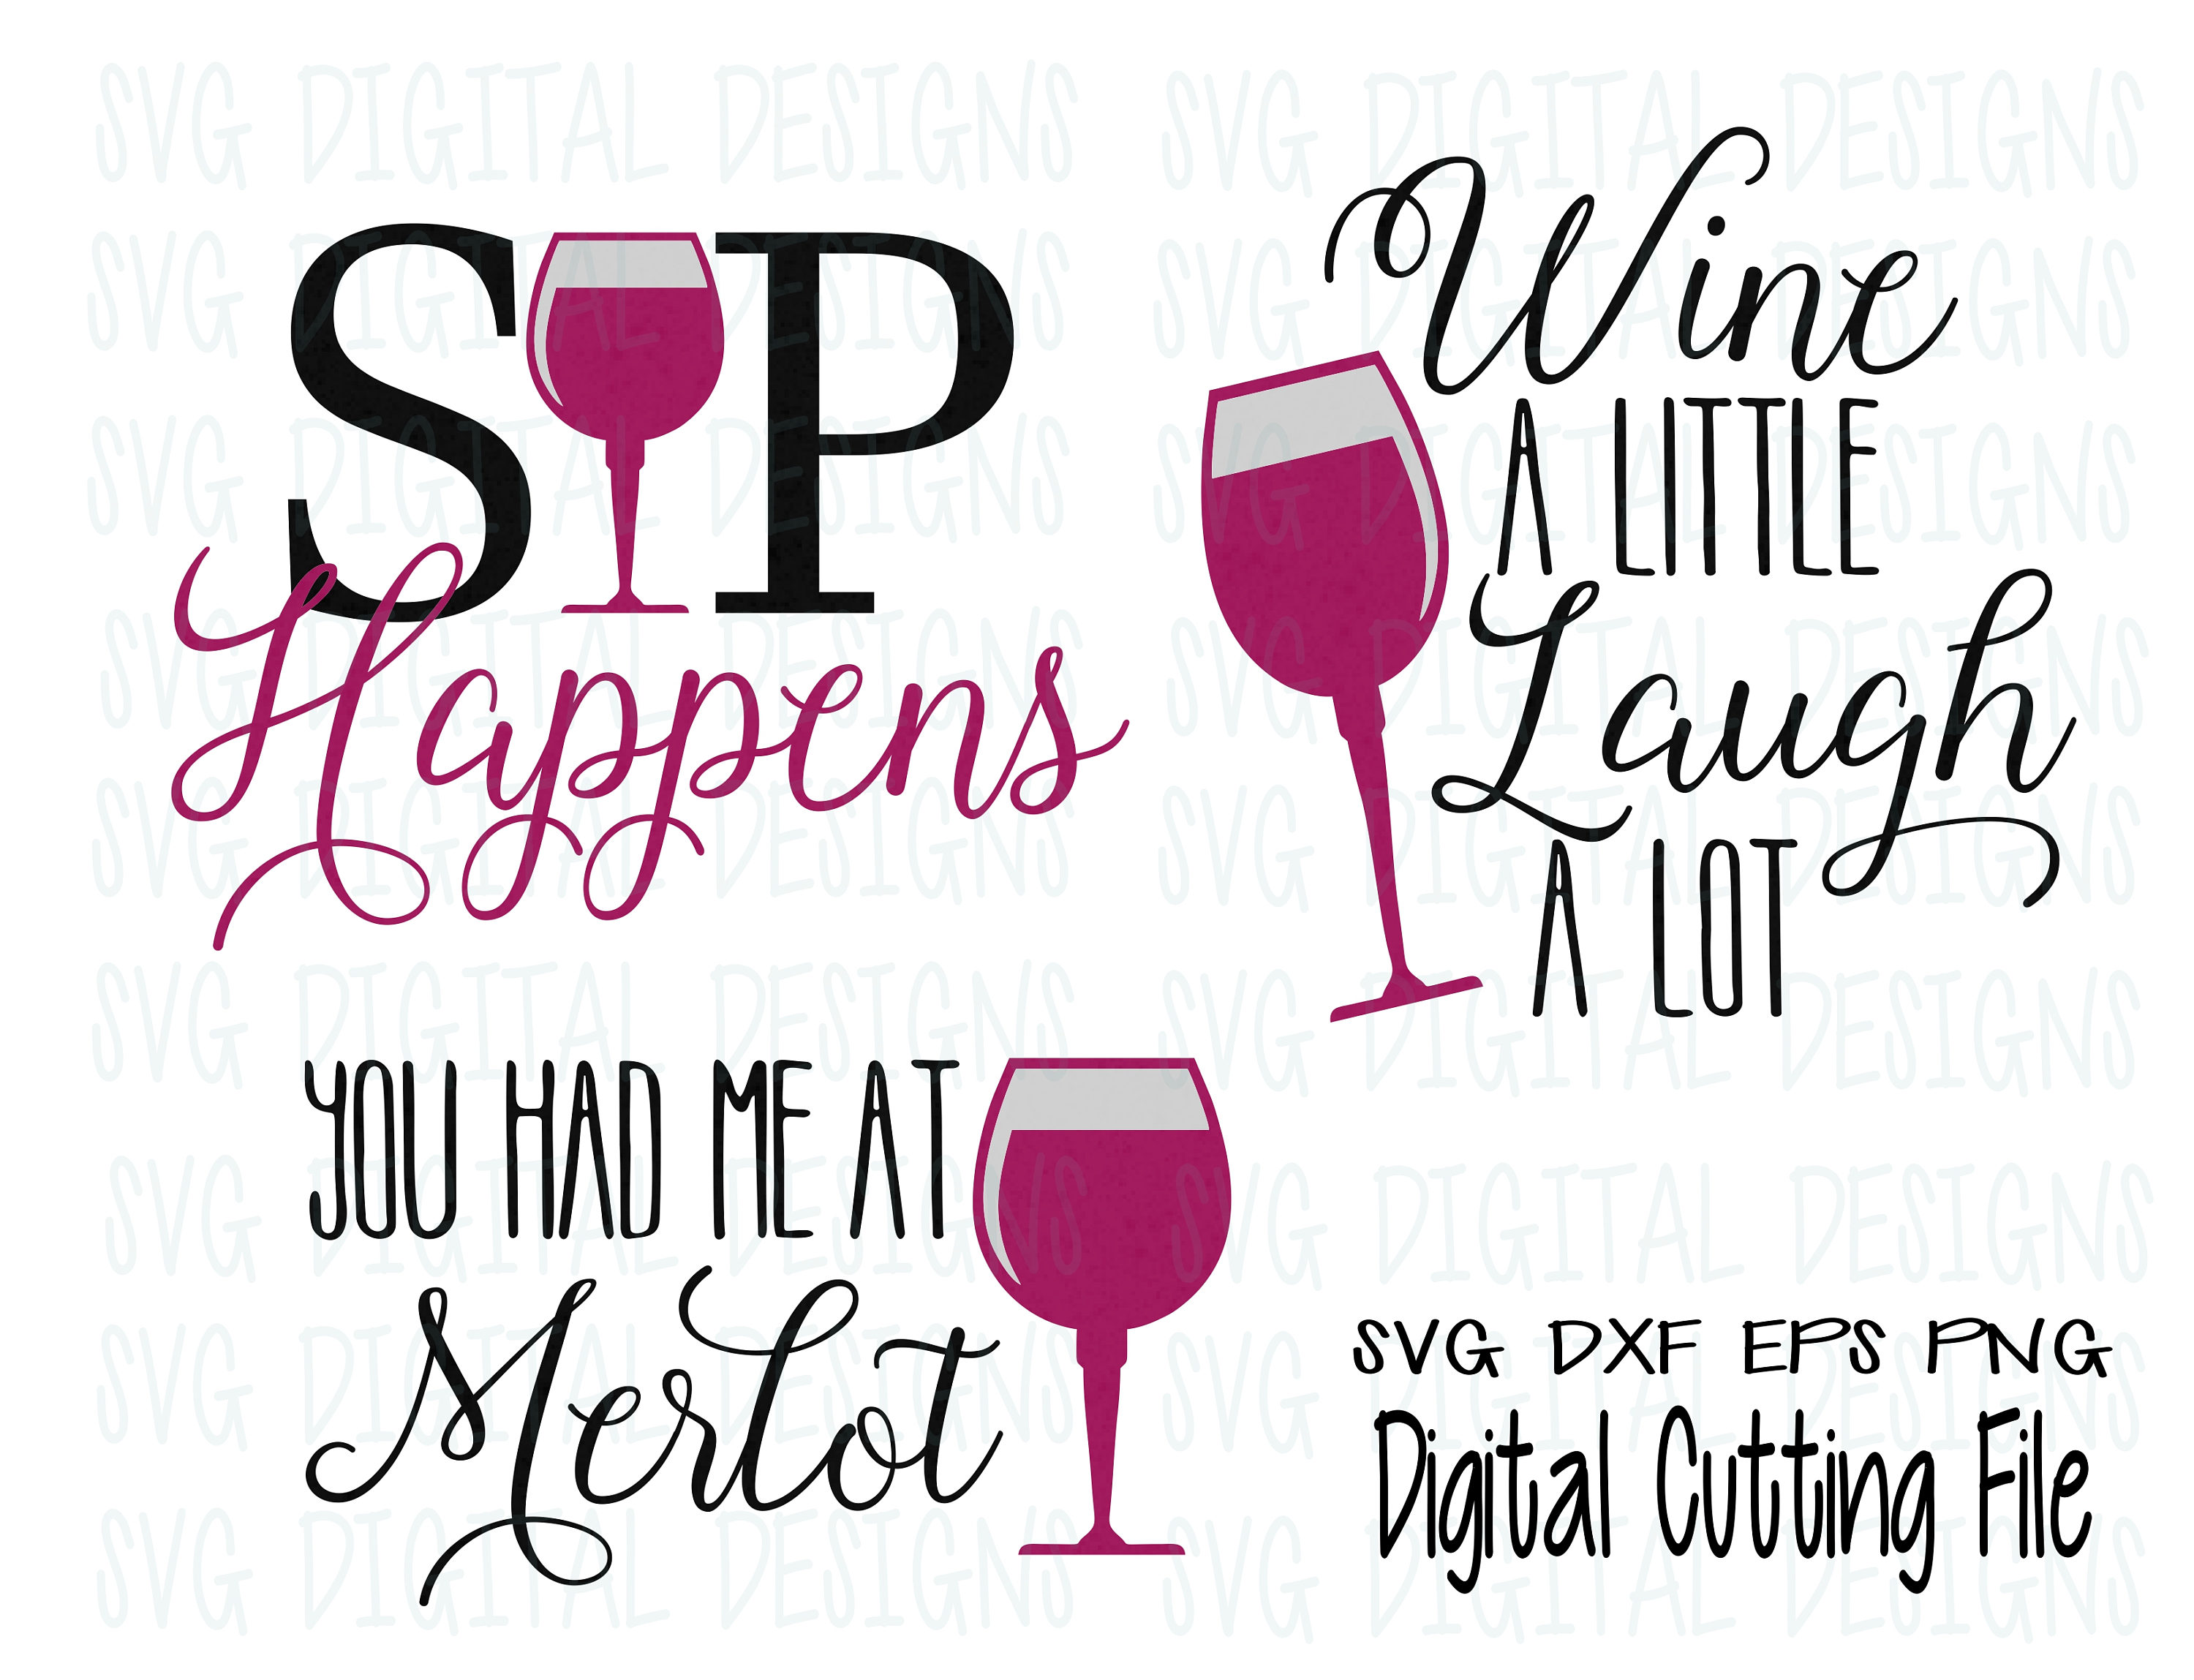 Wine quotes funny drinking glass saying svg svgs quote bundles cart add designer